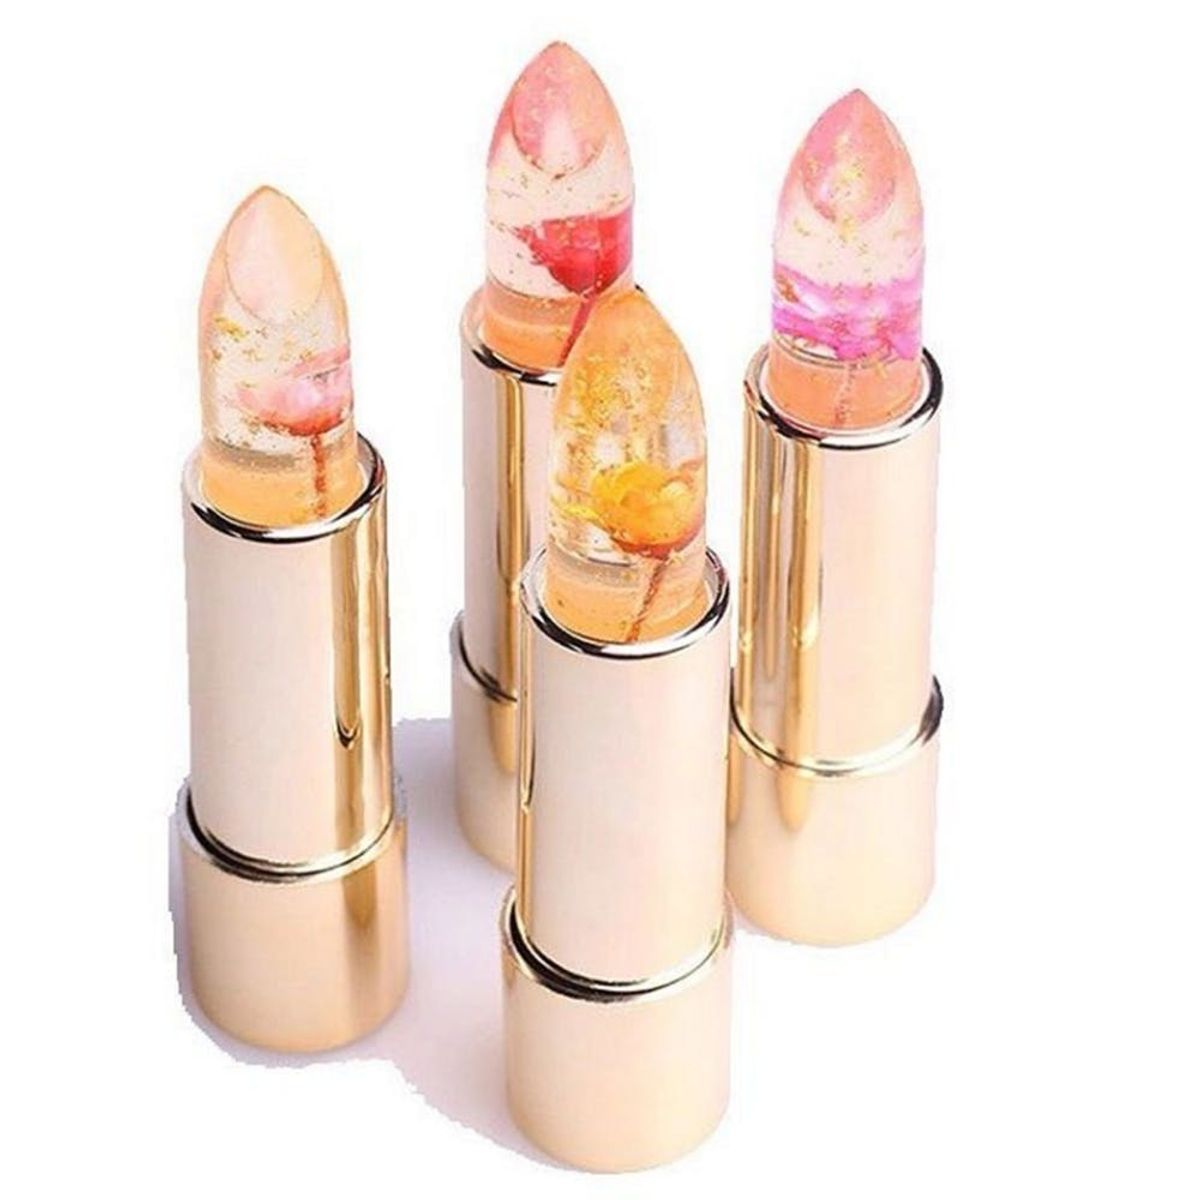 These Gold Flake + Floral Lipsticks Are Blowing People’s Minds